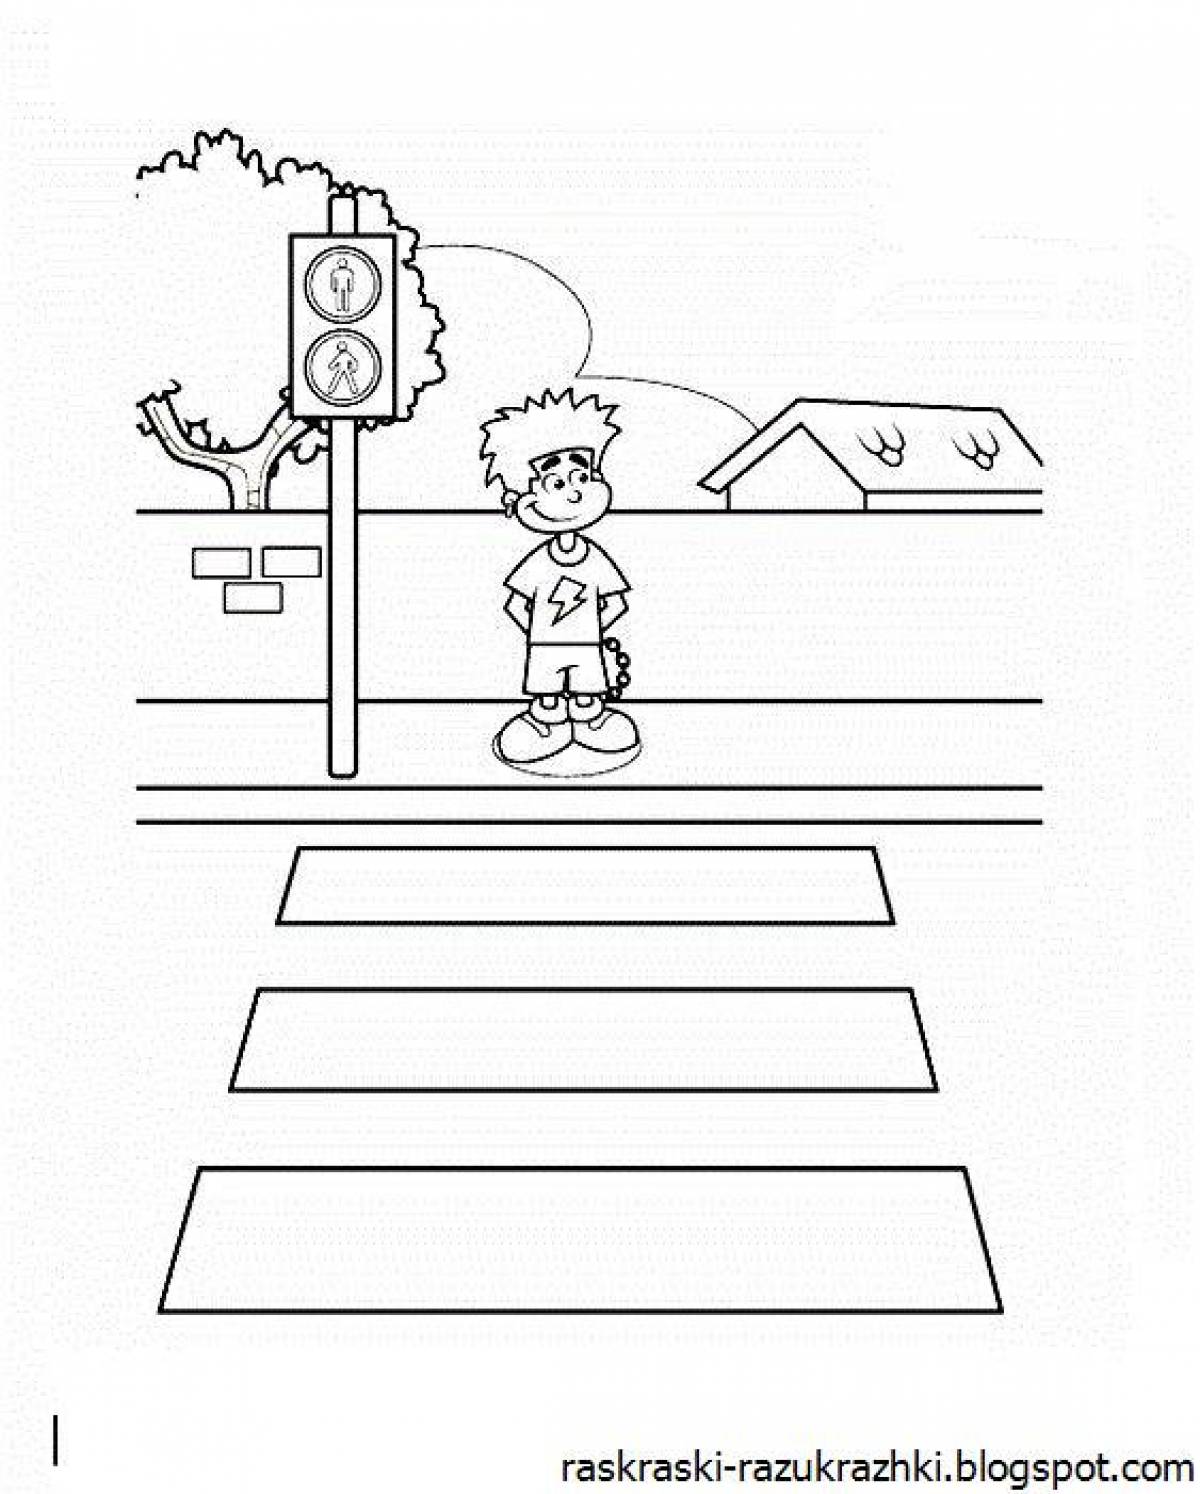 Amazing traffic rules coloring book for the little ones